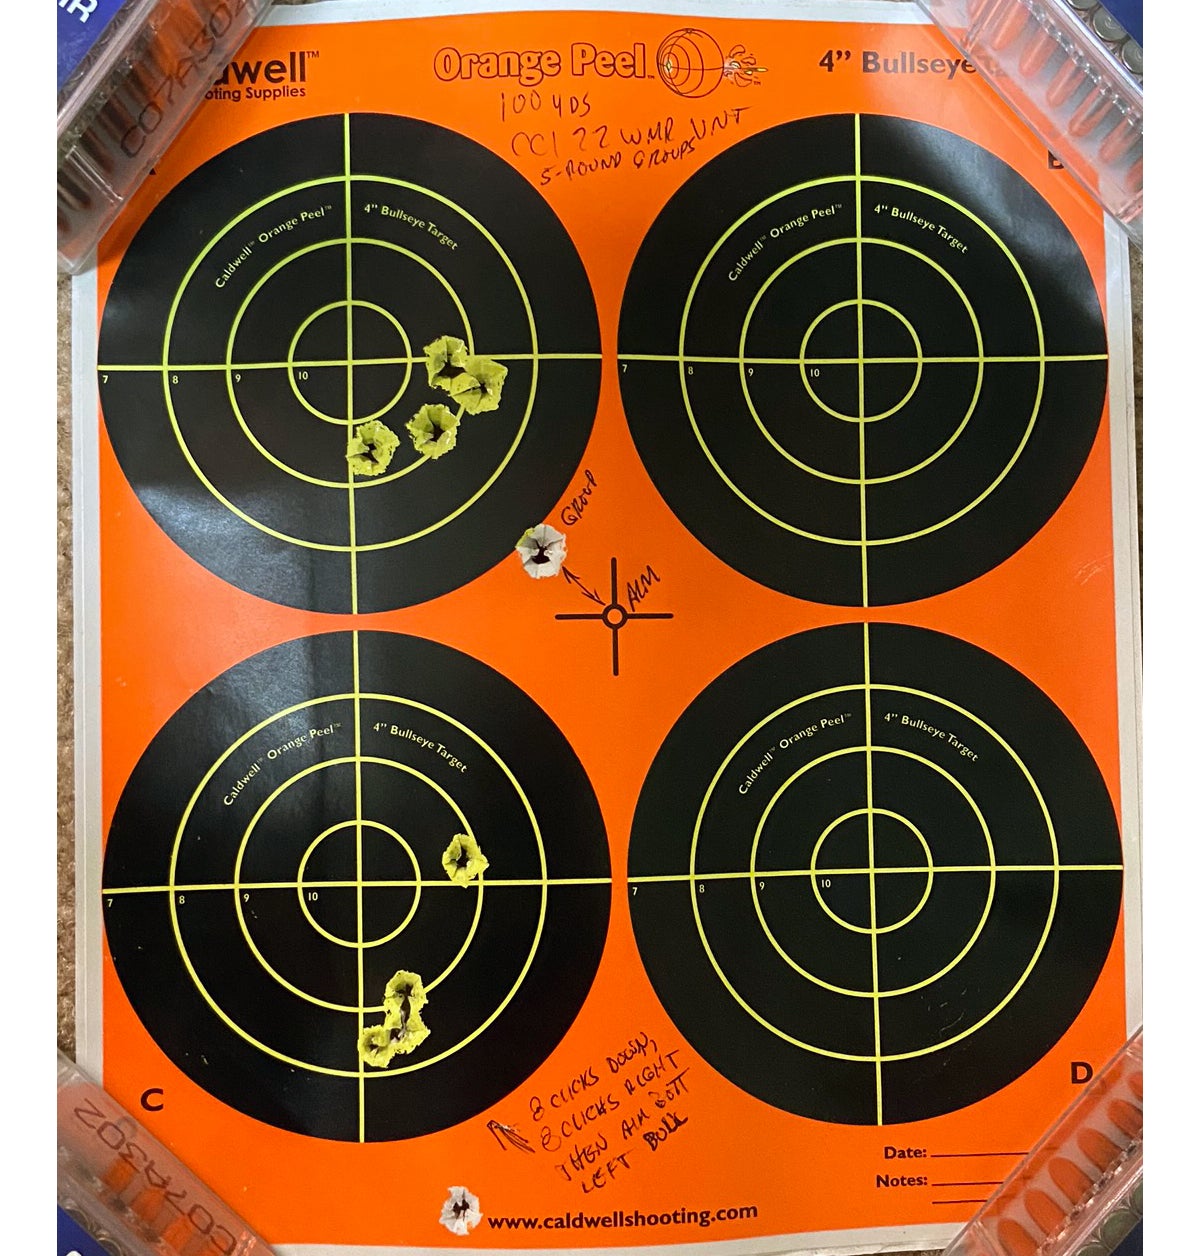 I fired these two 100-yard groups using the Mossberg. I aimed at center of target for the top group, then adjusted the scope and aimed at the bottom left bull. (Photo © Russ Chastain)